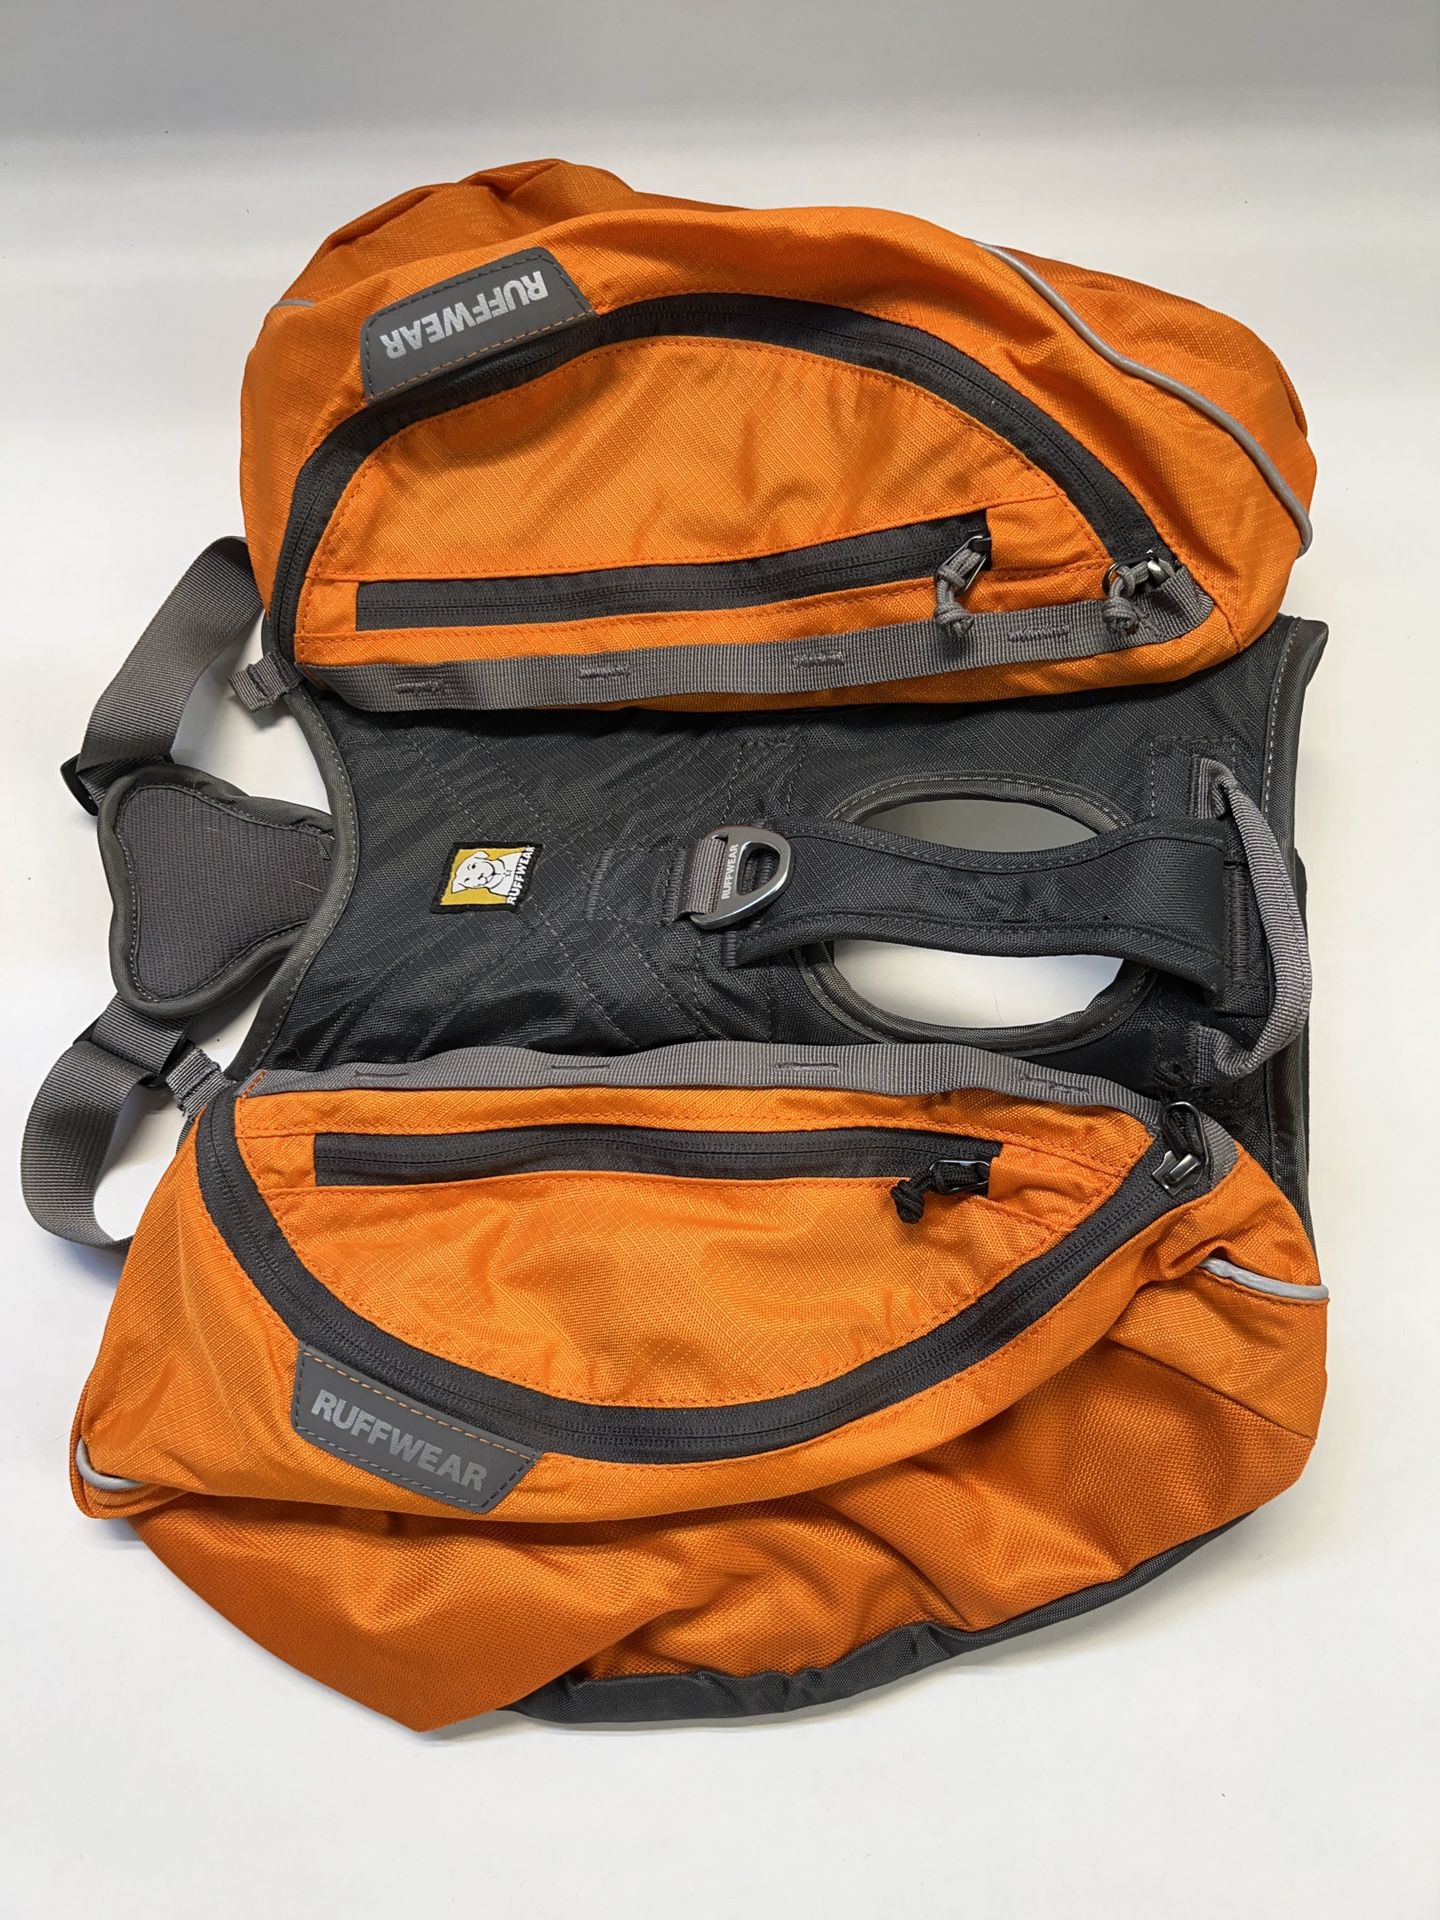 RUFFWEAR Approach Dog Backpack - day hiking overnight pack MED NEW Orange Grey